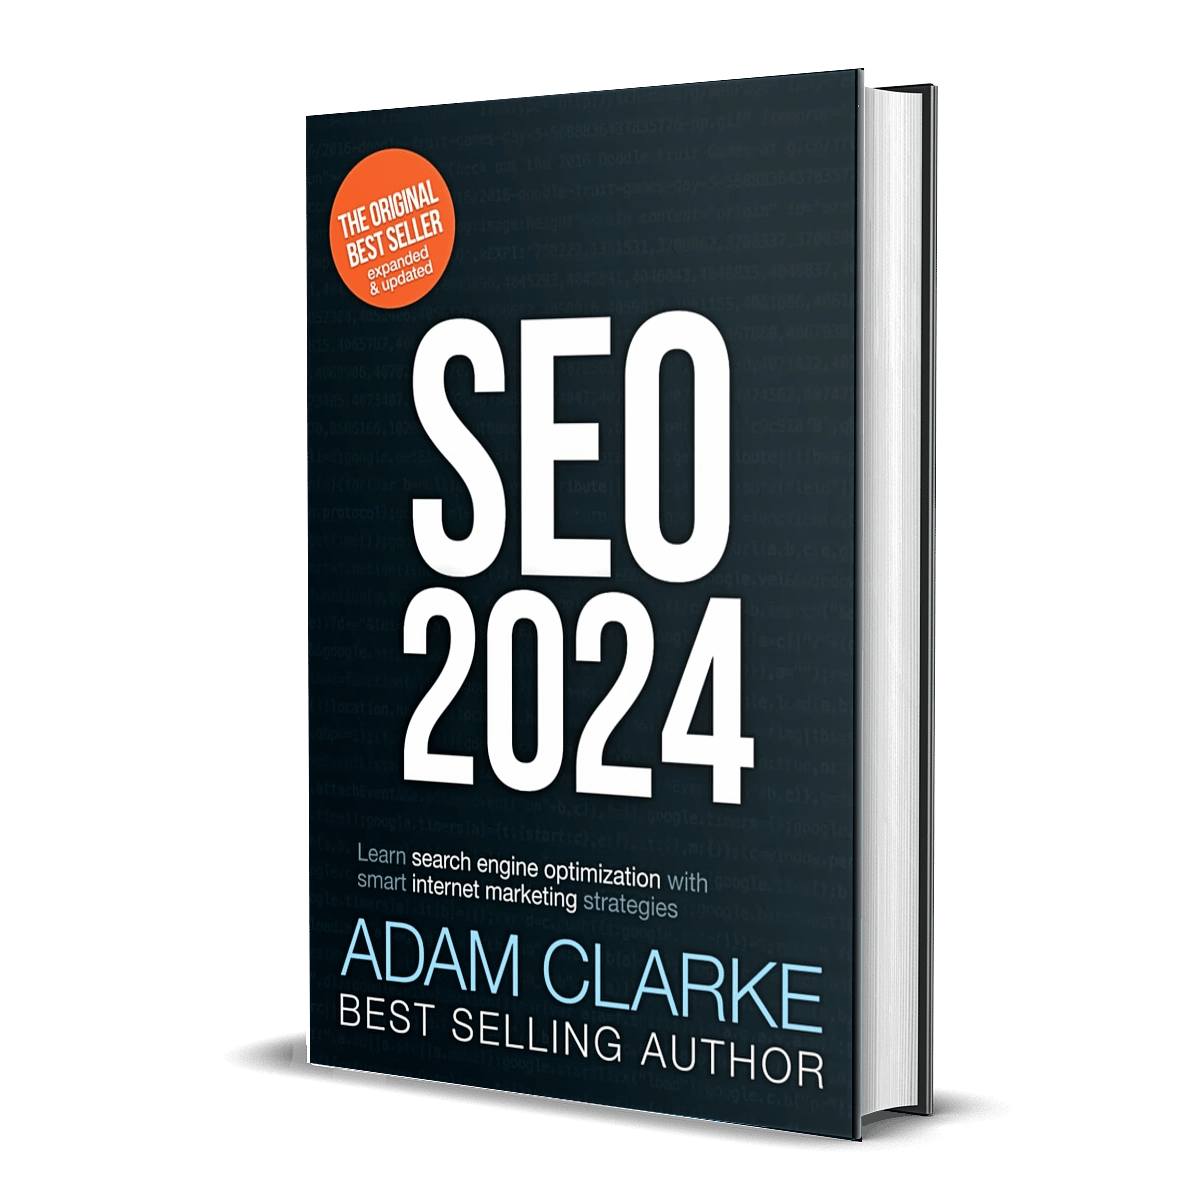 SEO 2023 by Adam Clarke is considered the top blogging book resource for SEO.